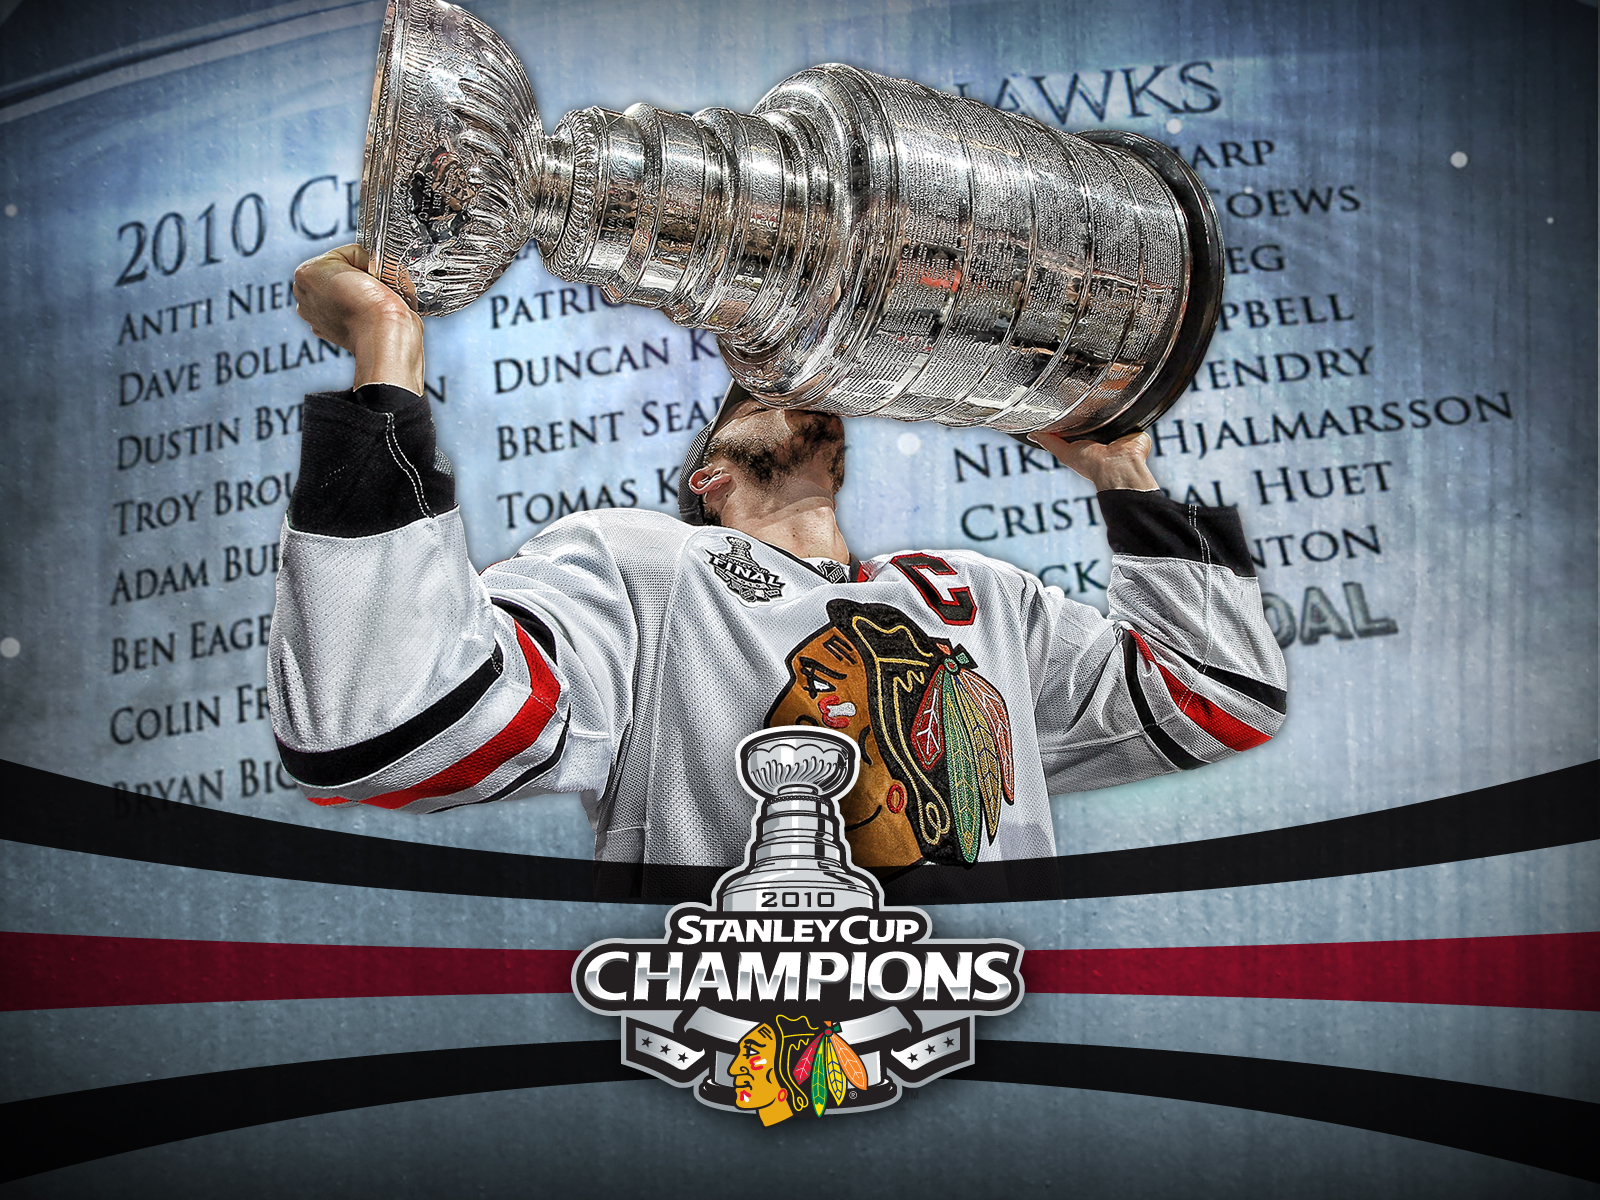 Widescreen Stanley Cup Champs Toews